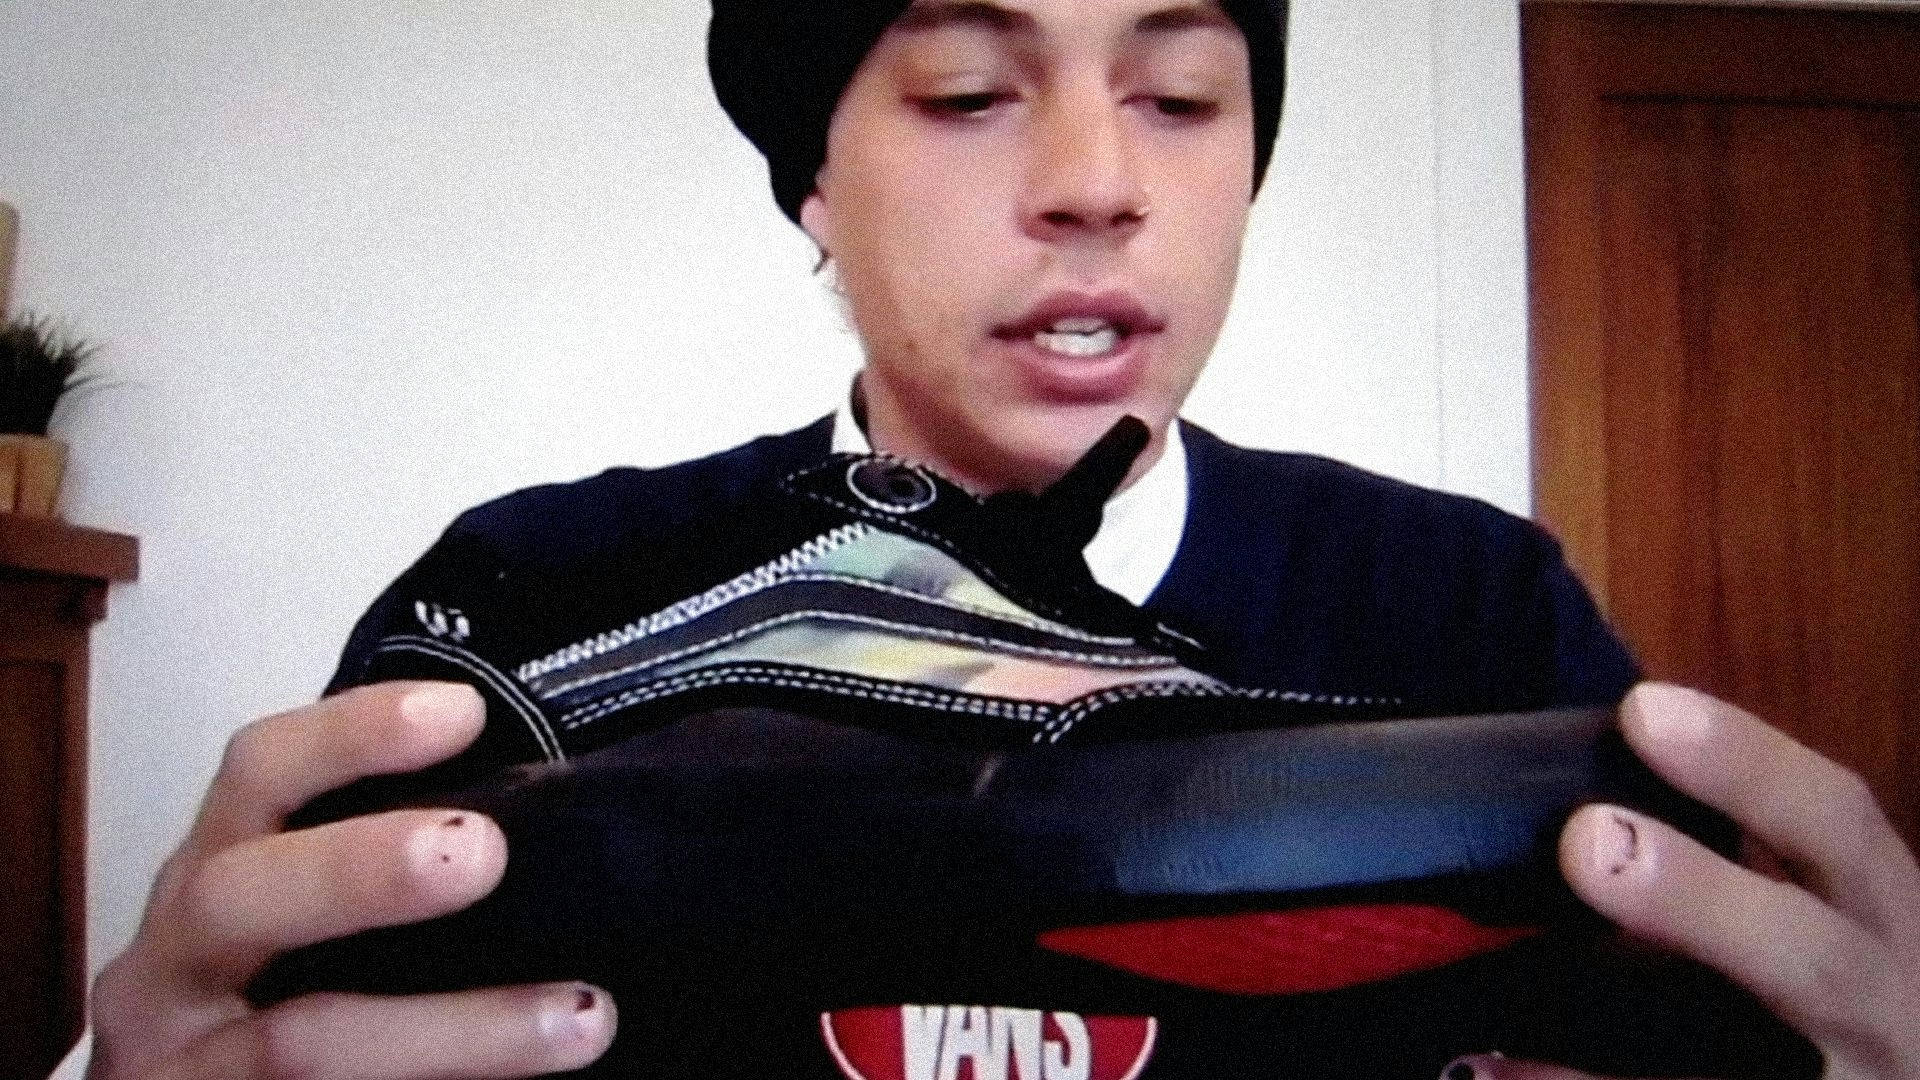 A person holds the shoe in front of the camera for the Vans The Wayvee Campaign